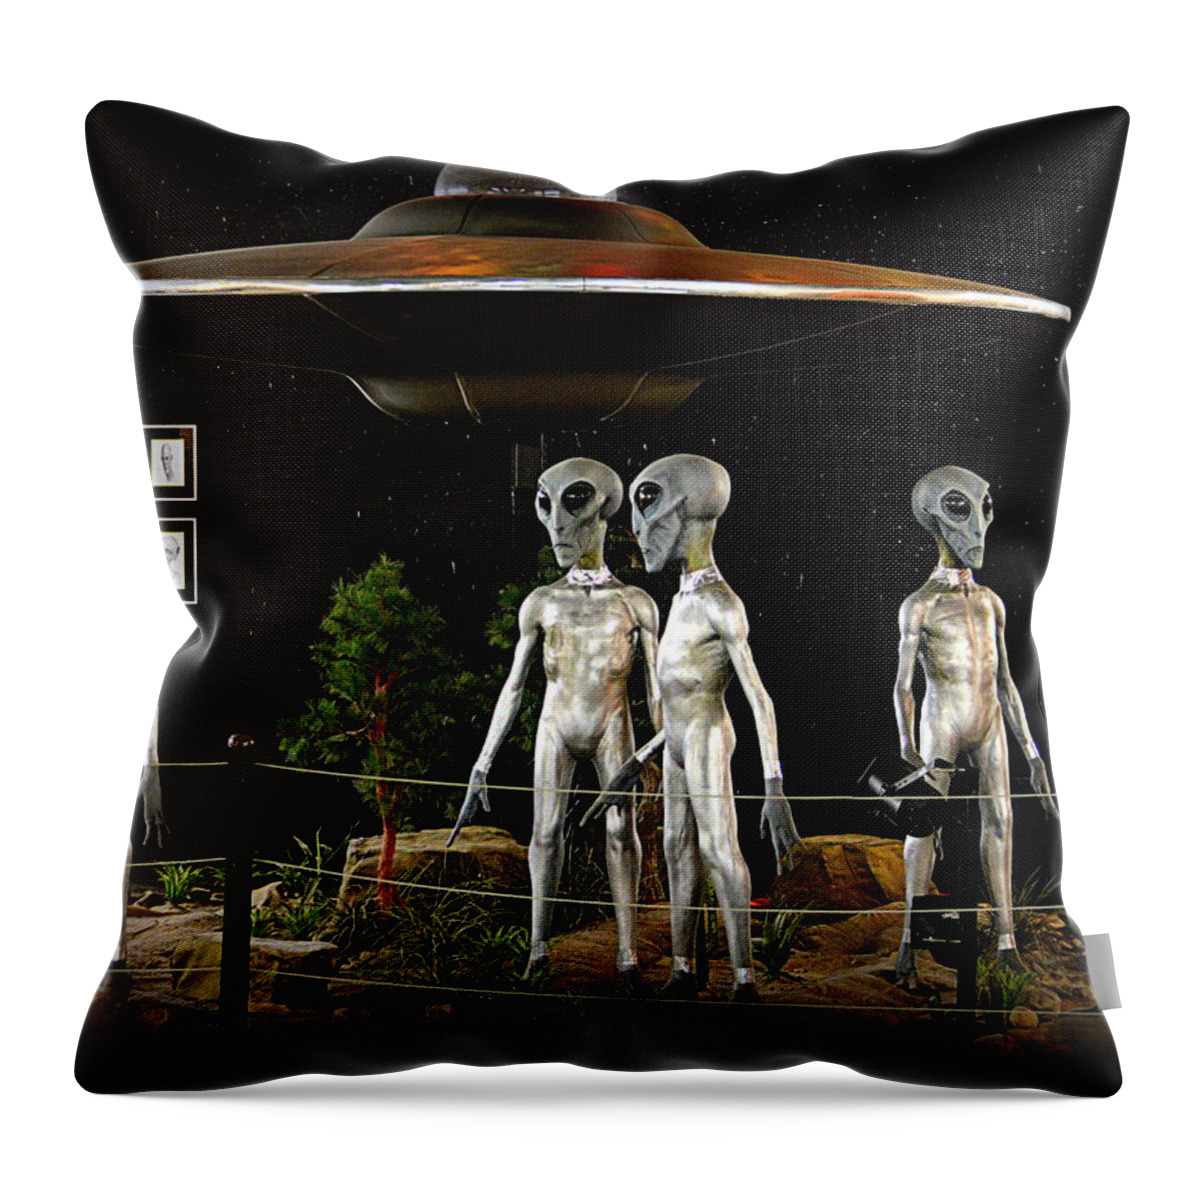 Statues Throw Pillow featuring the photograph Not of this Earth by AJ Schibig